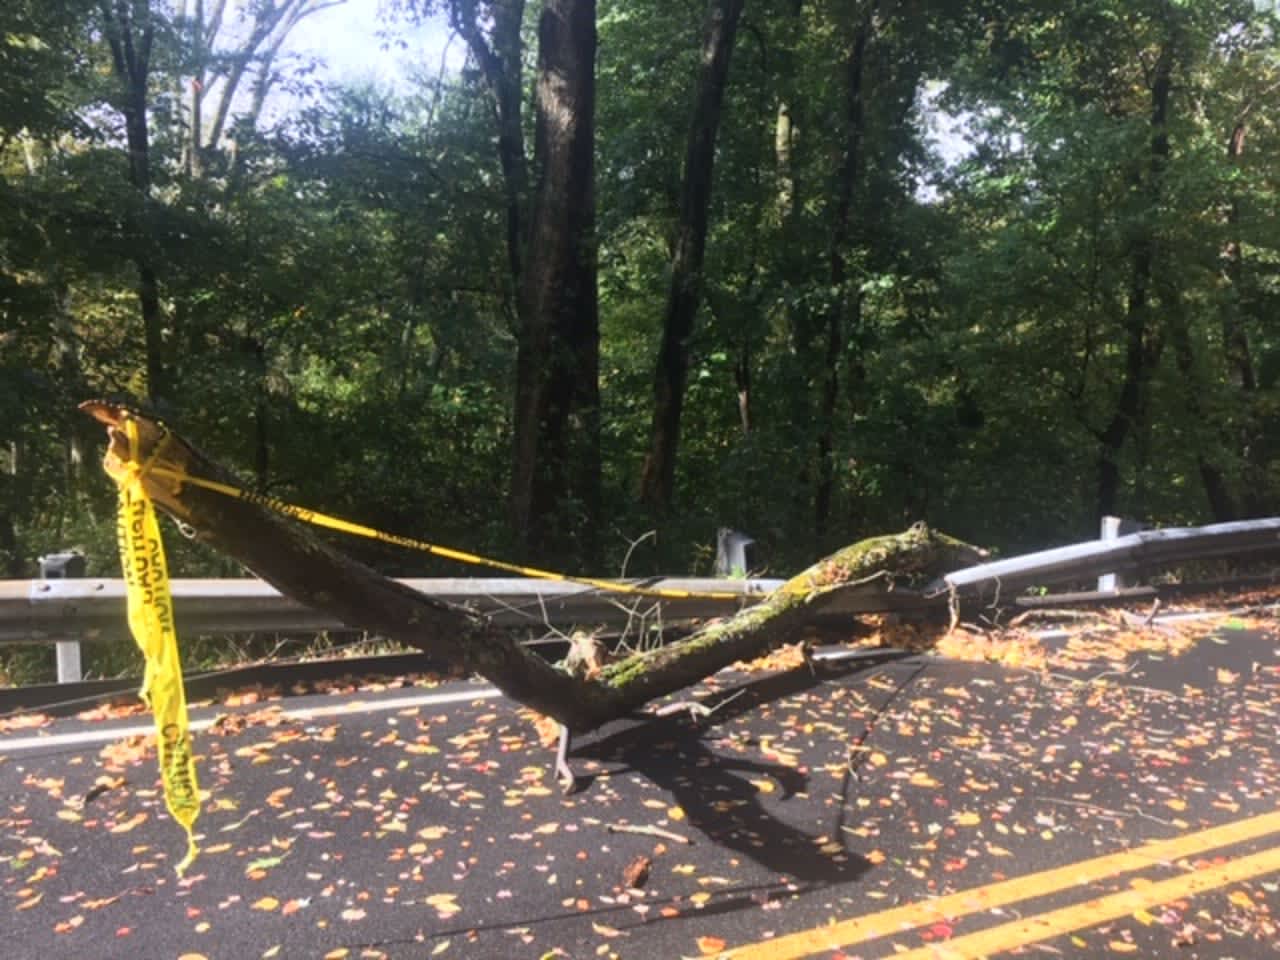 Schools throughout Fairfield County are closed due to loss of power from powerful storms with strong wind gusts that moved through the area and new COVID-19 cases at other schools.